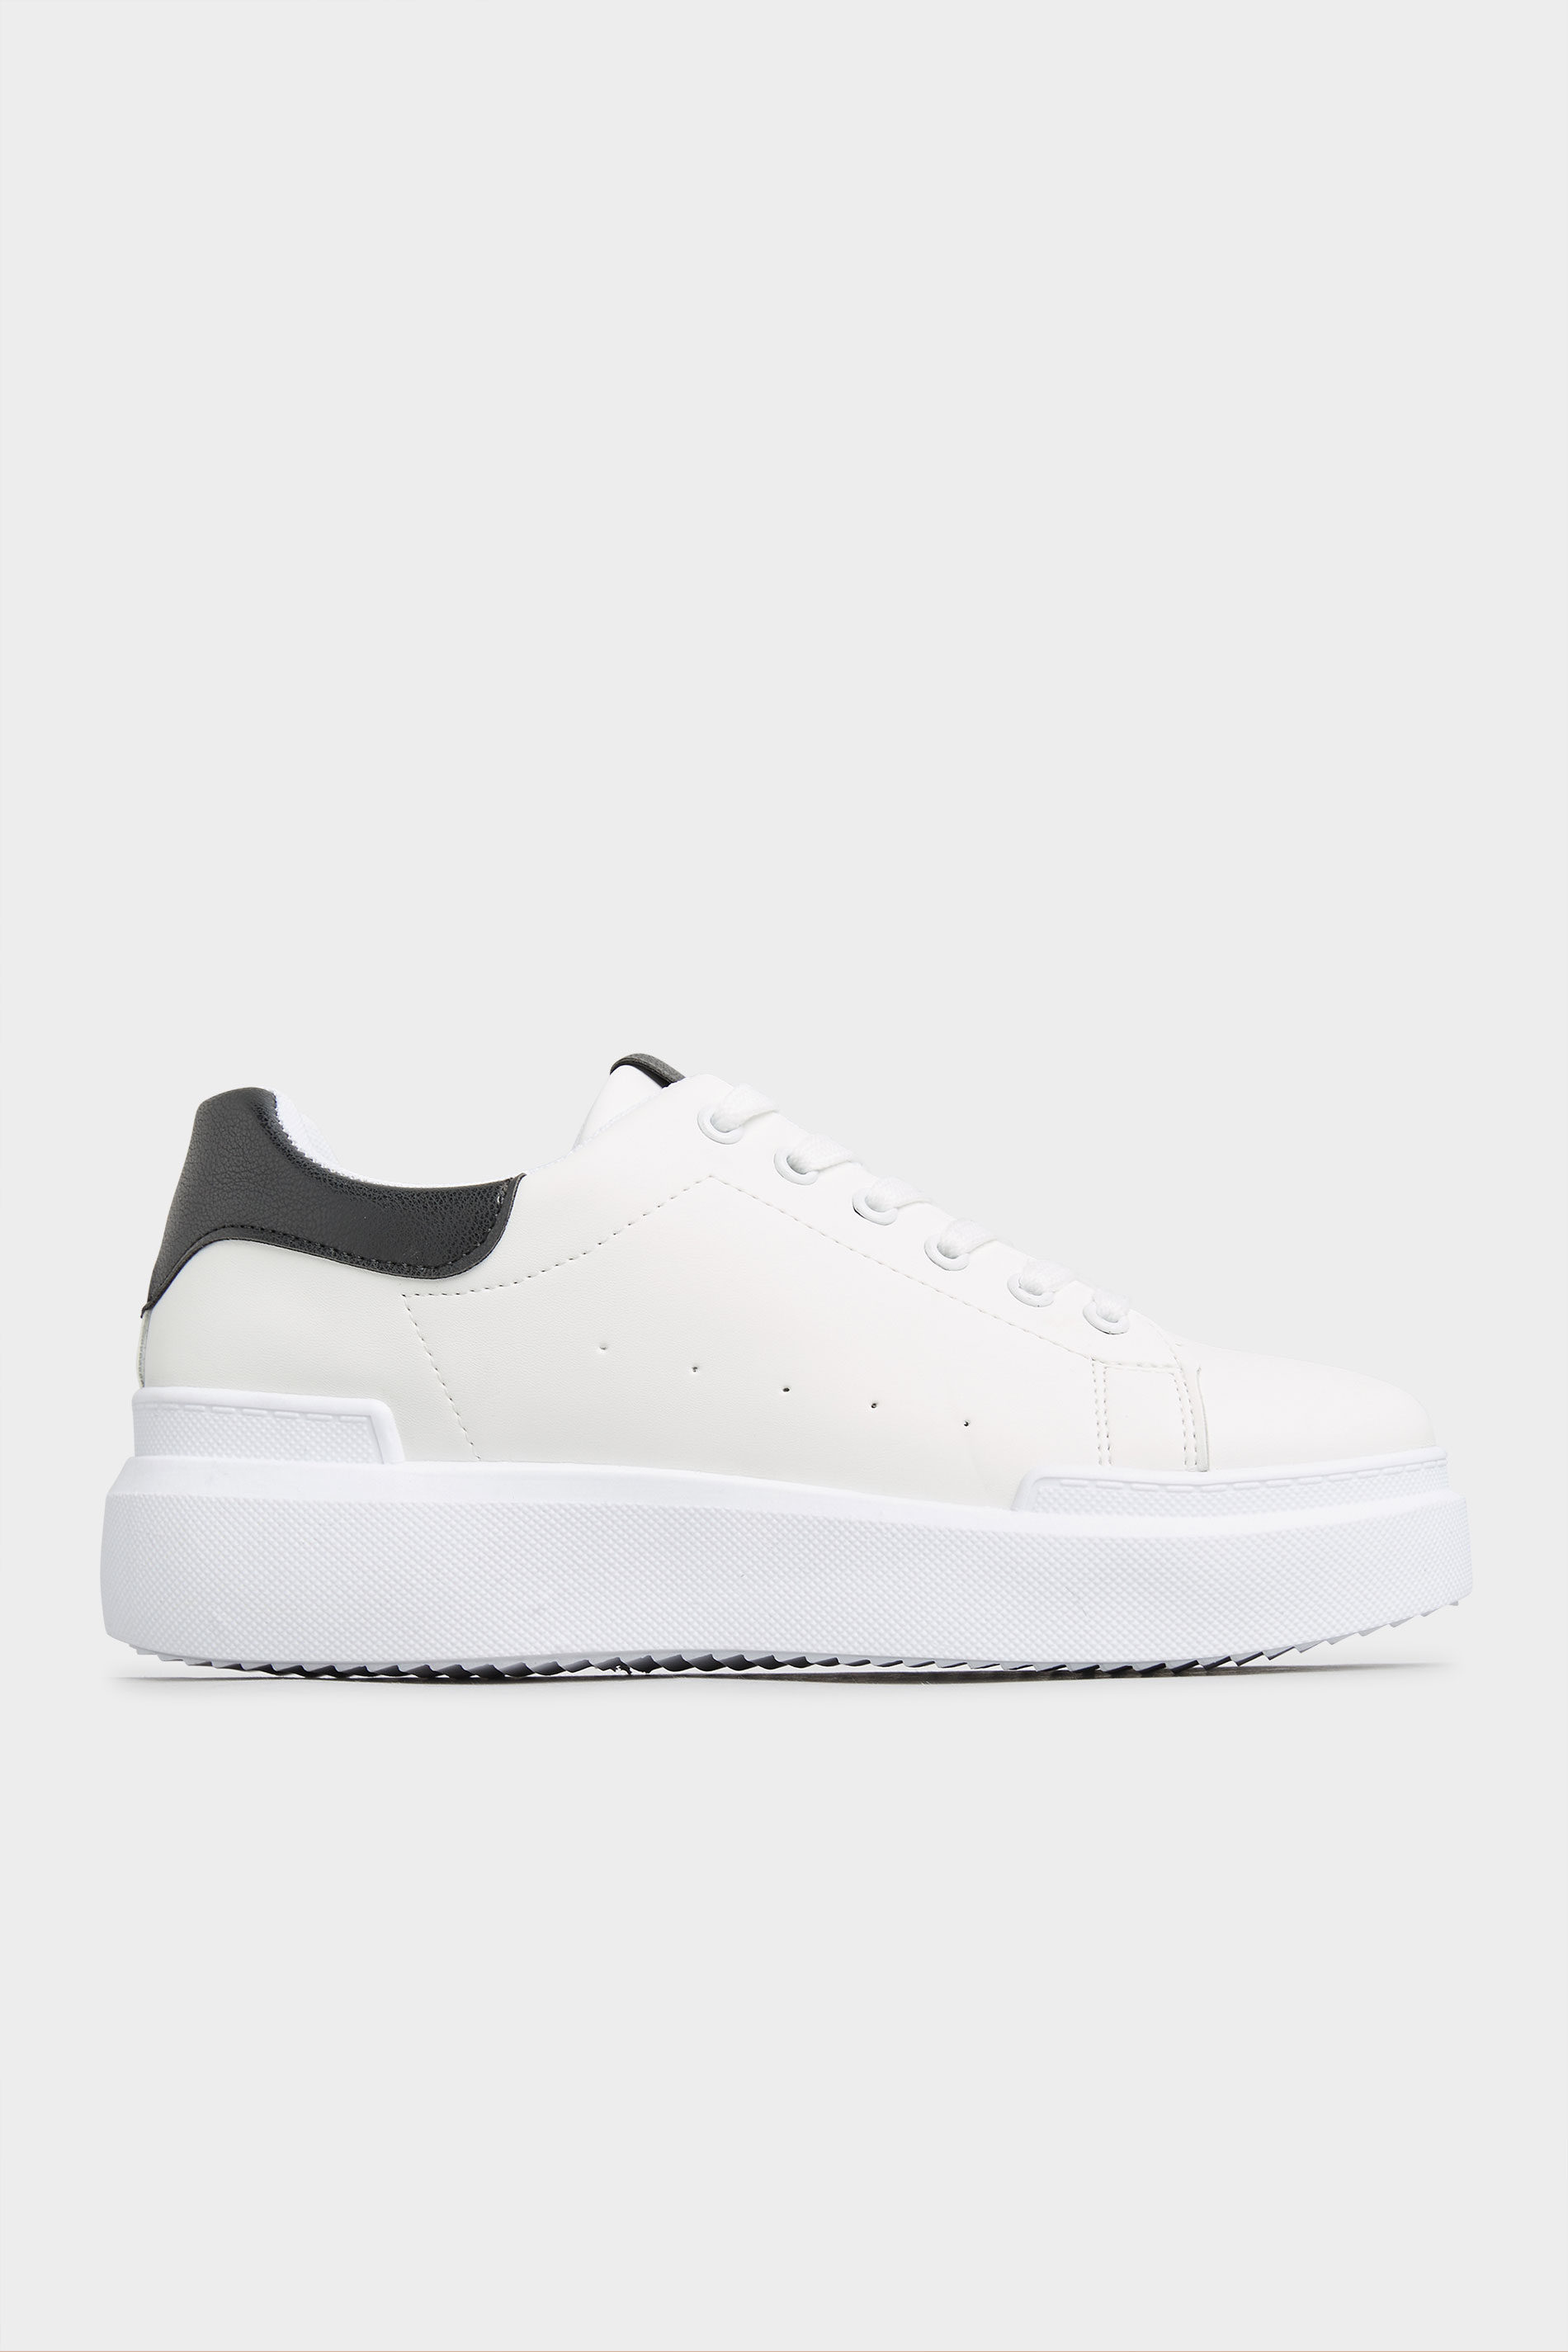 LIMITED COLLECTION White and Black Flatform Trainer In Wide Fit | Yours Clothing 3